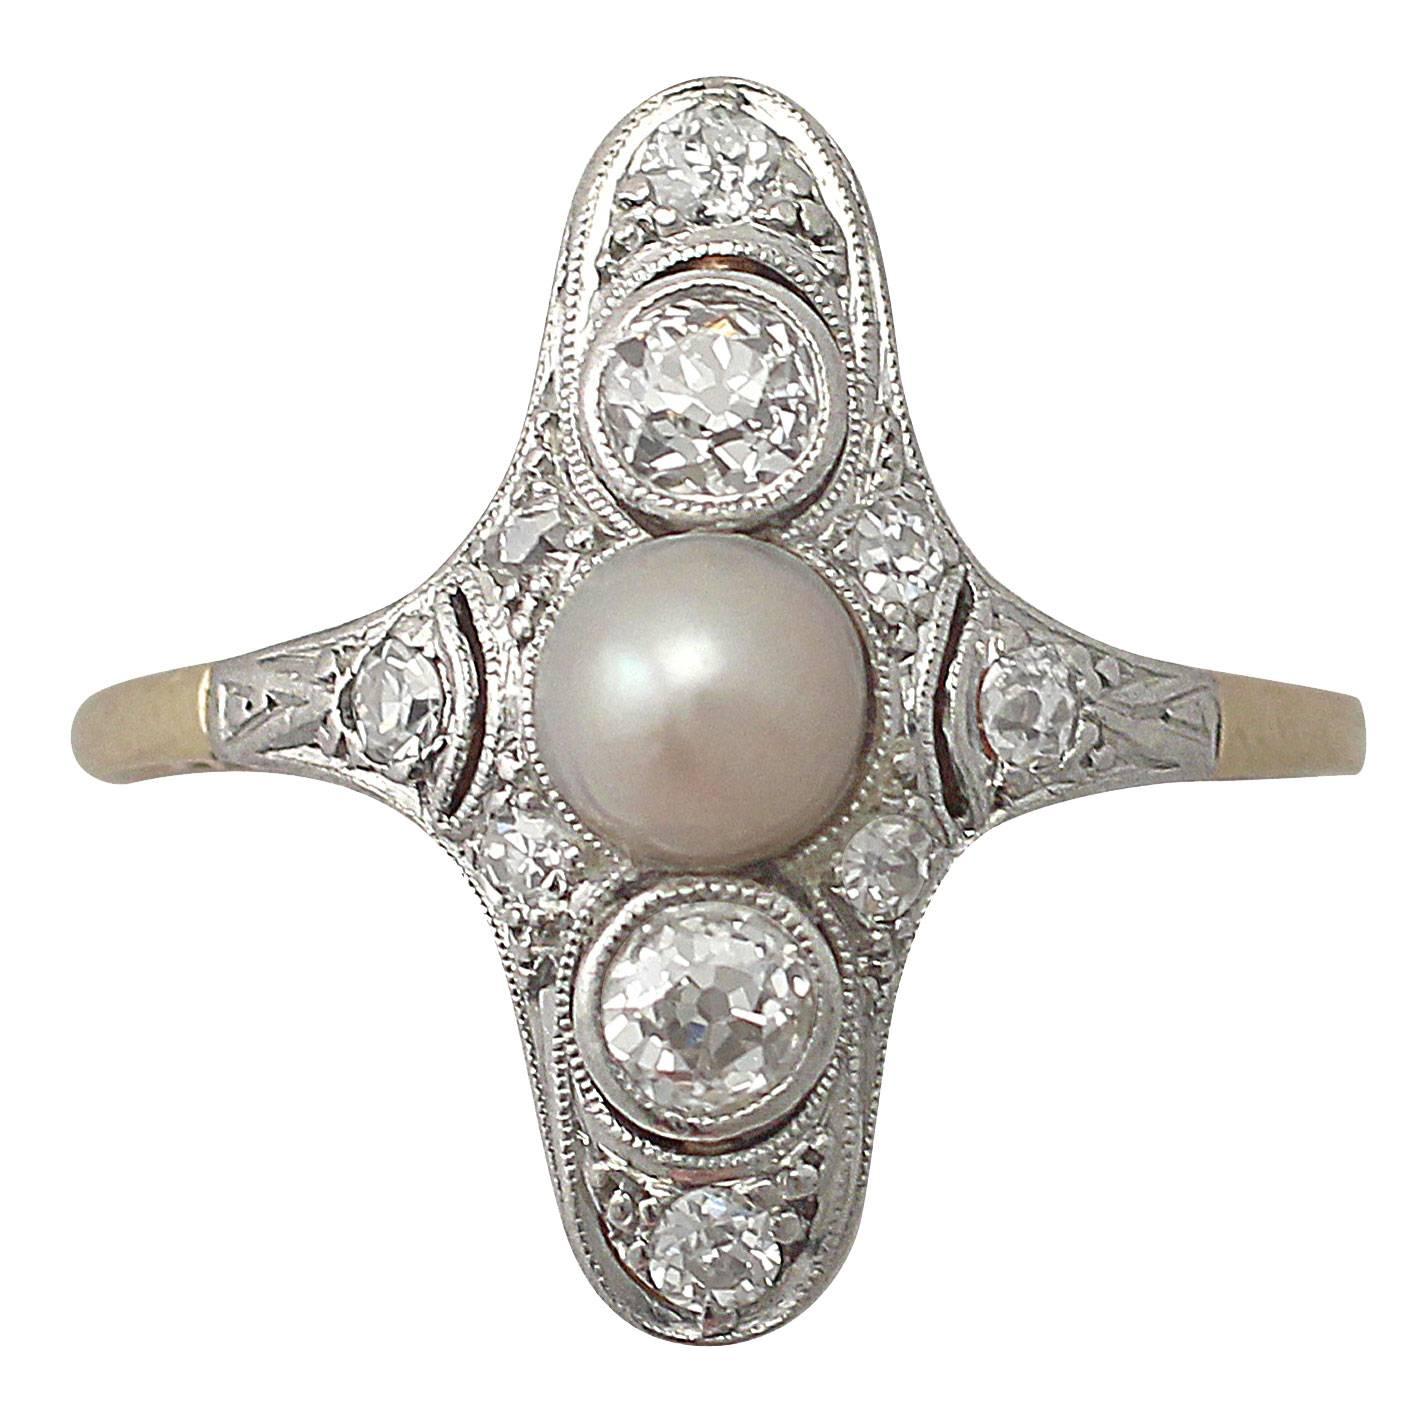 Pearl and 0.45Ct Diamond, 14k Yellow Gold Dress Ring - Antique Circa 1920